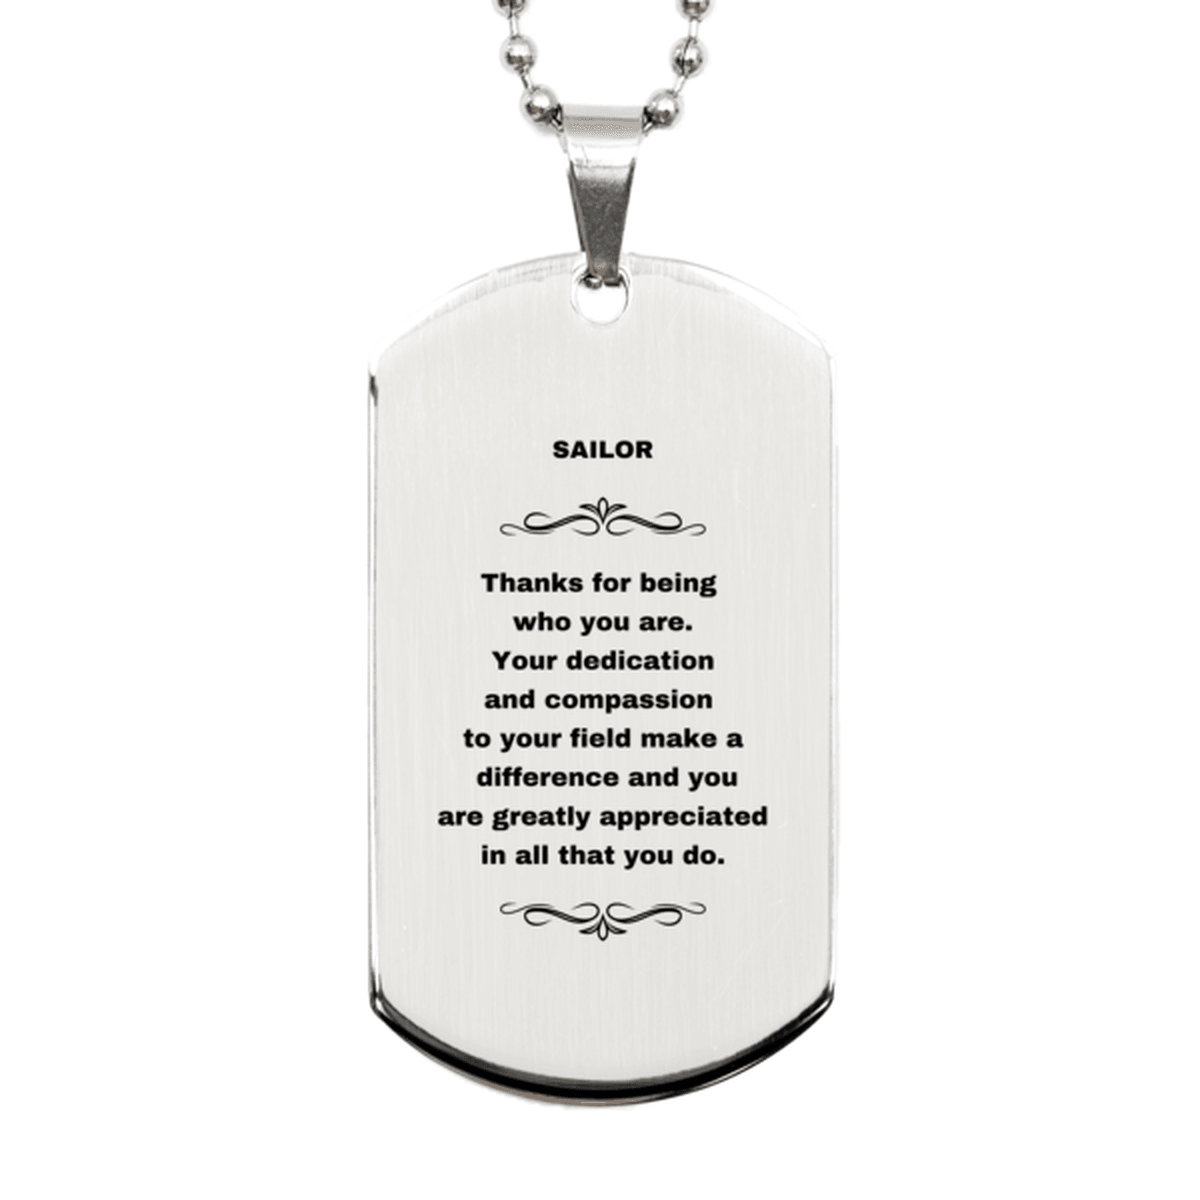 Sailor Silver Dog Tag Engraved Necklace - Thanks for being who you are - Birthday Christmas Jewelry Gifts Coworkers Colleague Boss - Mallard Moon Gift Shop